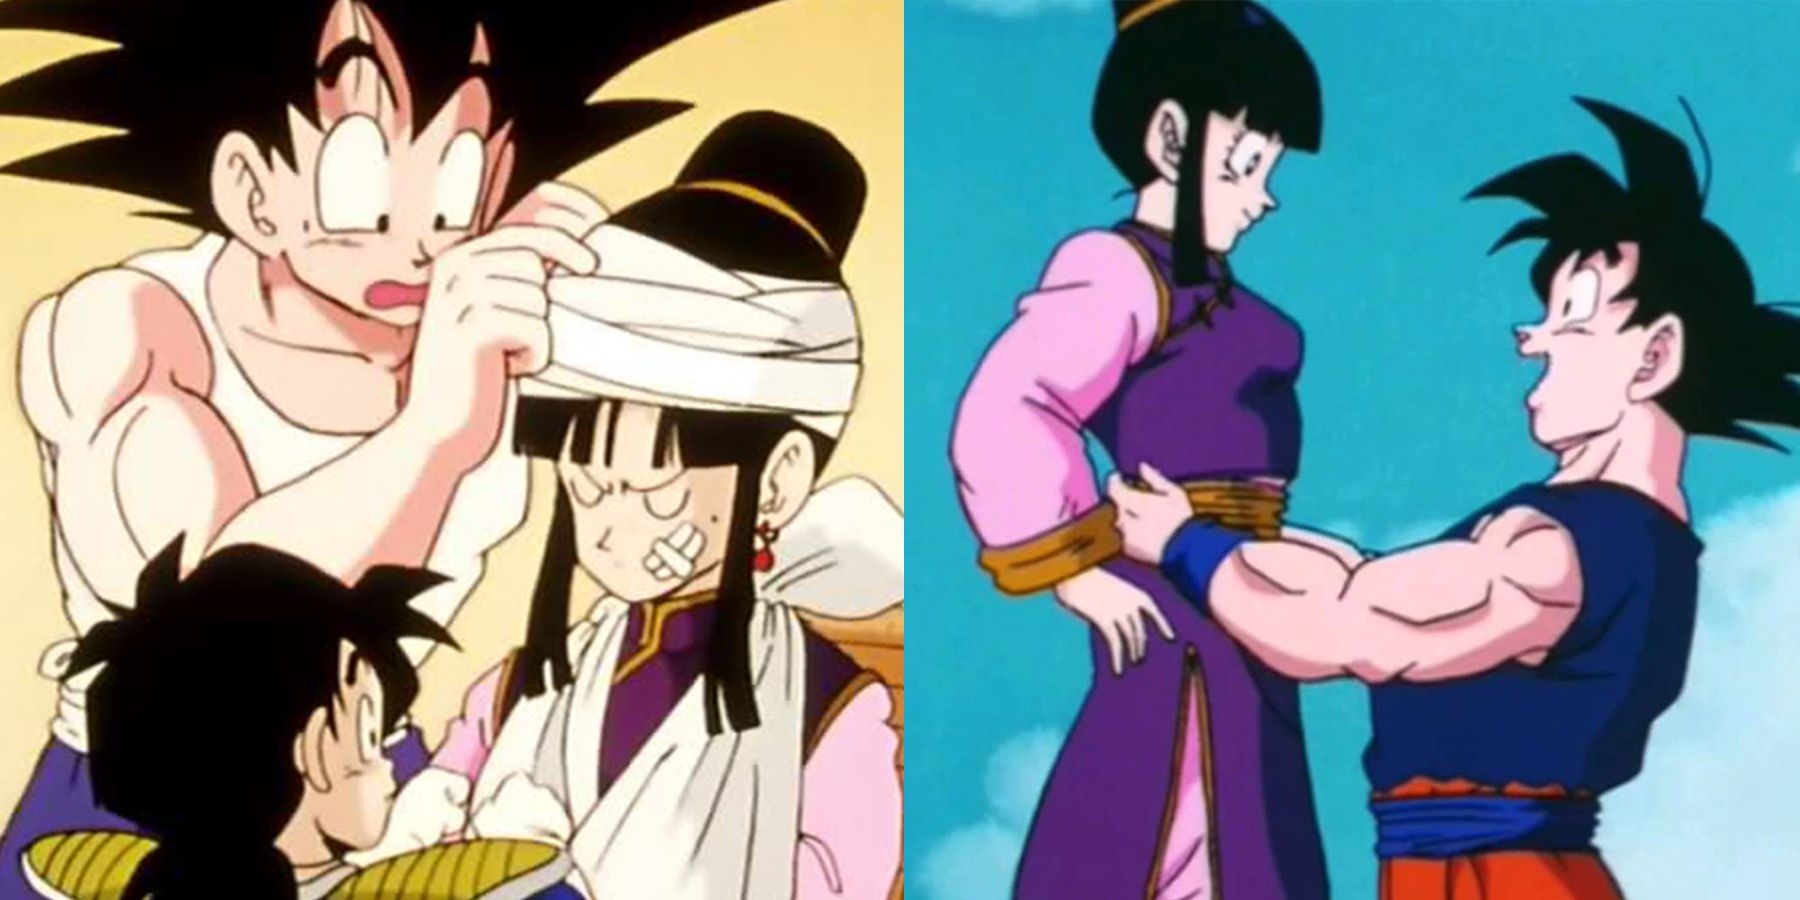 Split images of Goku and Chi-Chi from the Dragon Ball anime.